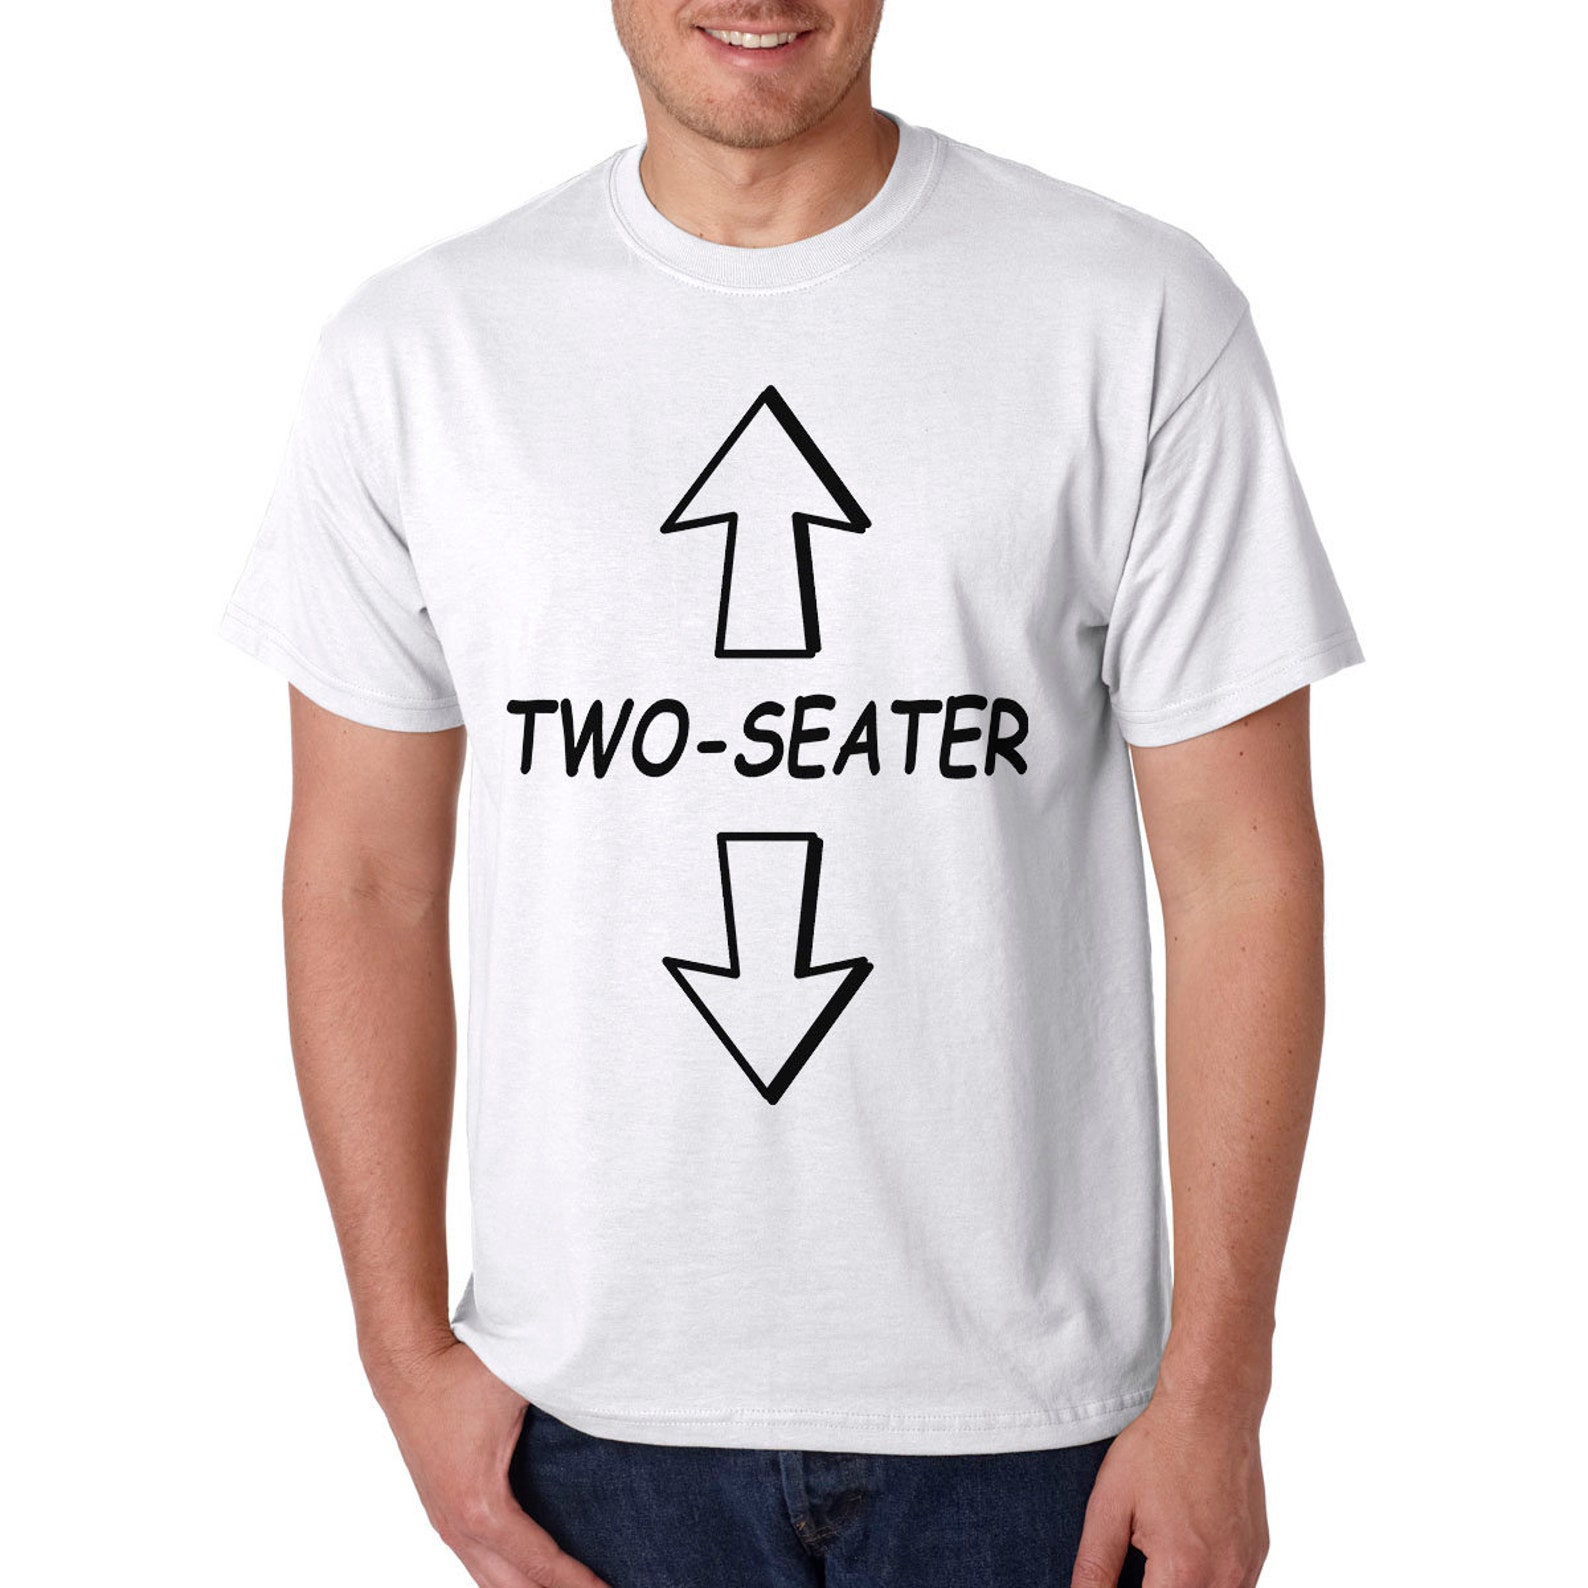 Two-seater T-shirt Funny Adult Rude Offensive College Humor - Etsy